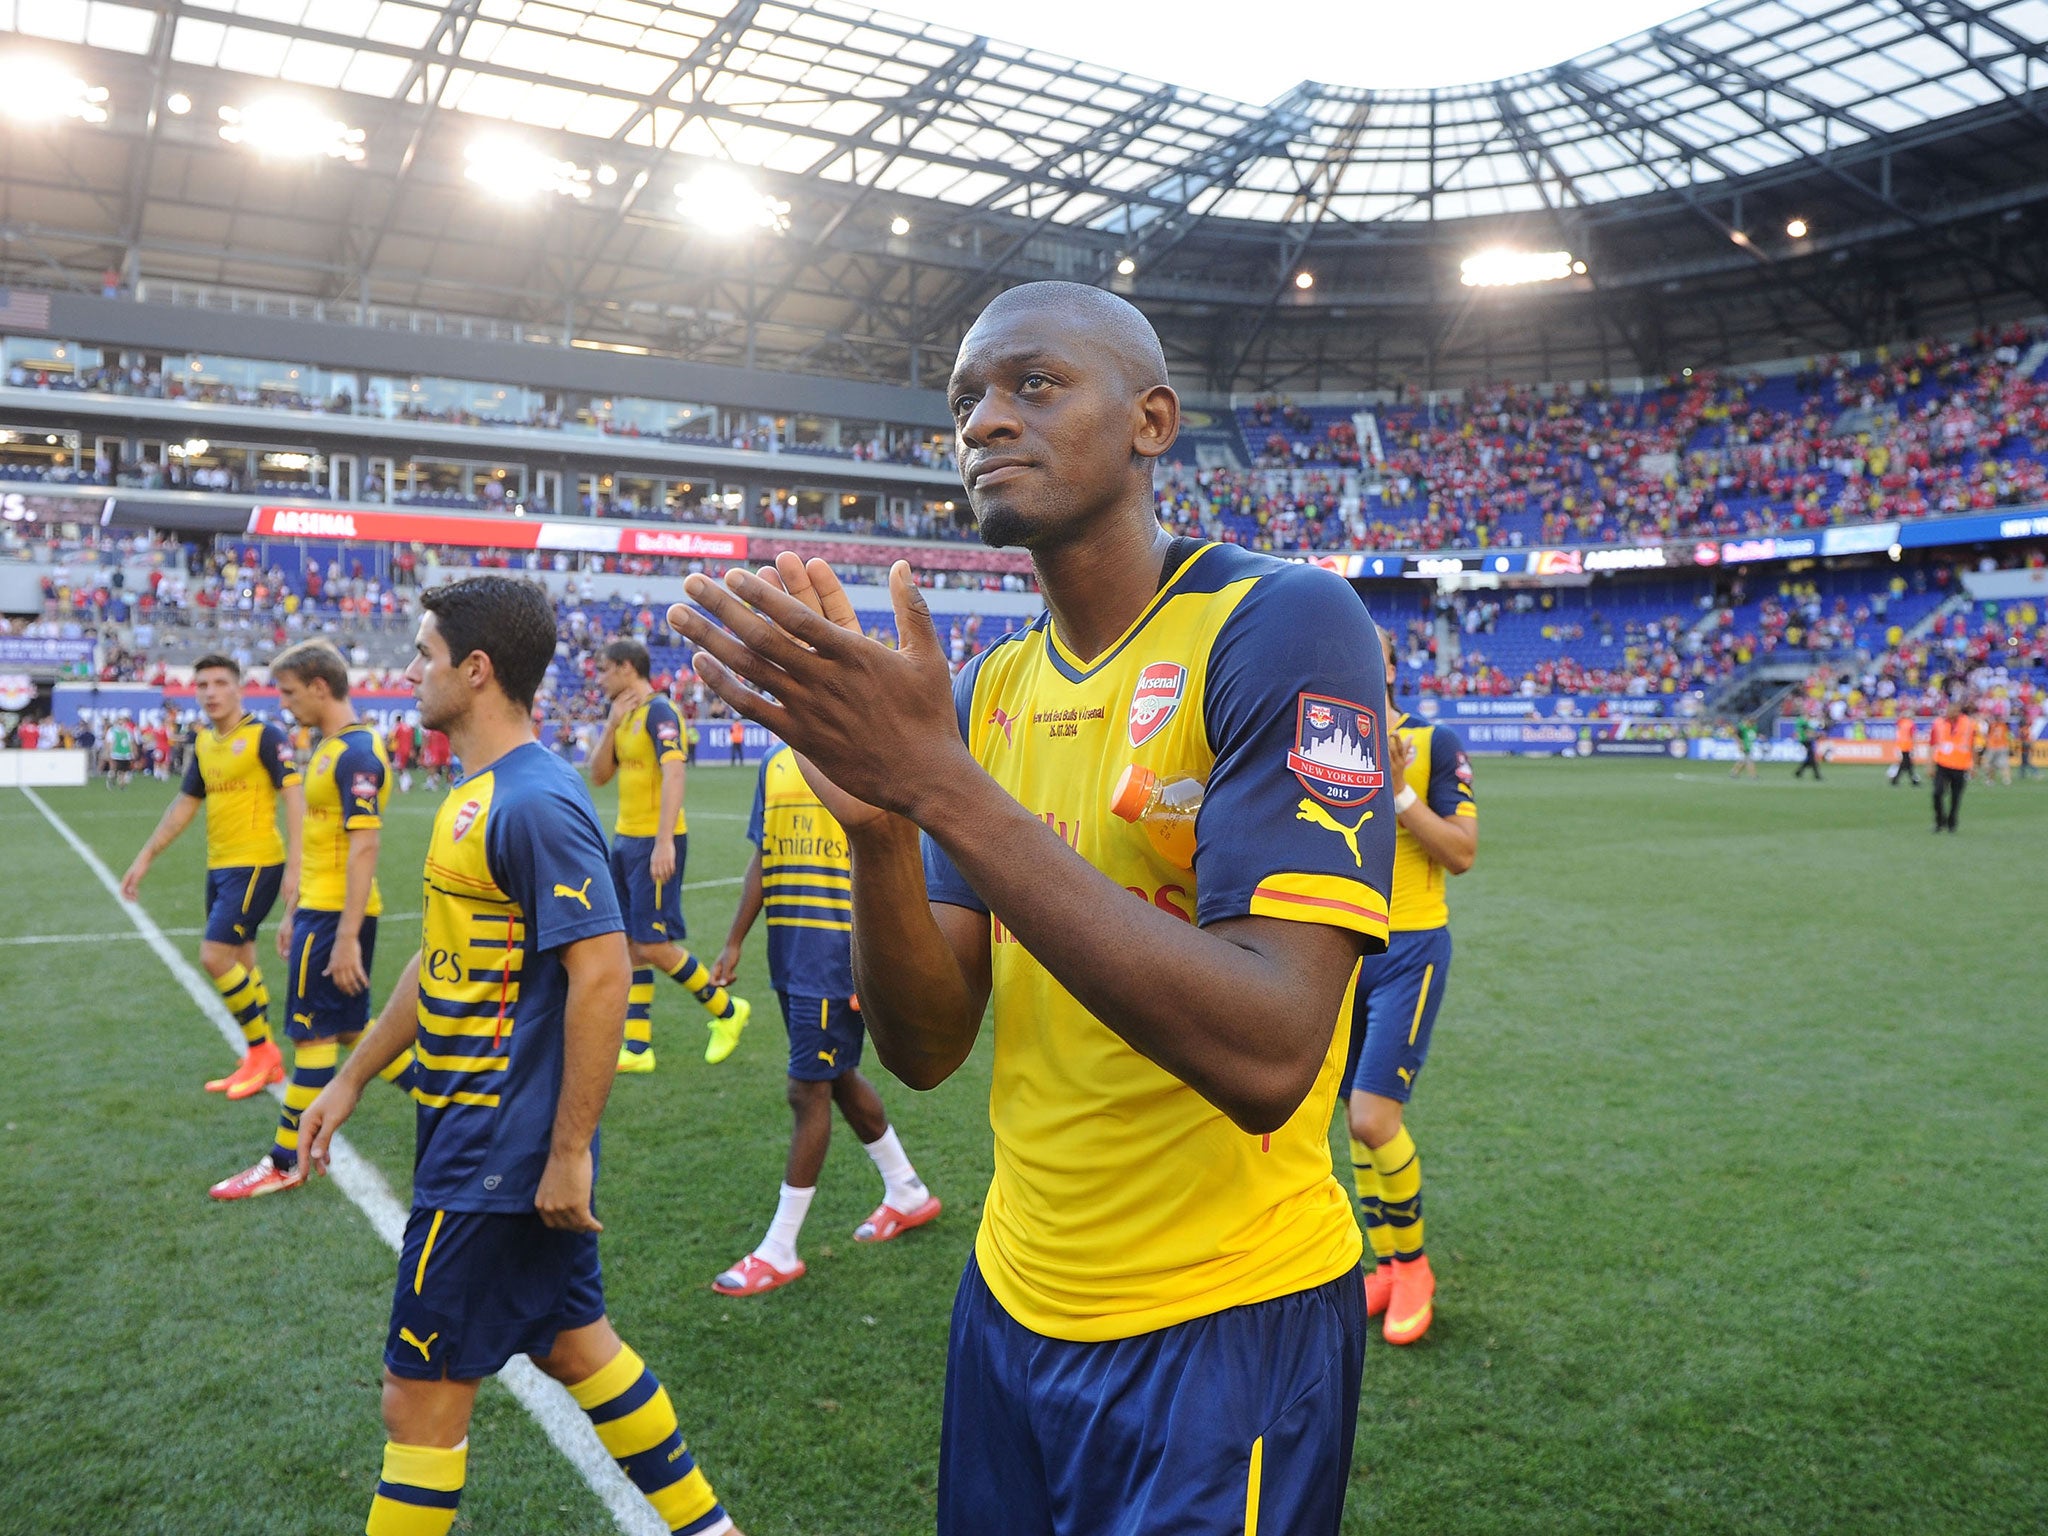 Abou Diaby has suffered a reported hip injury